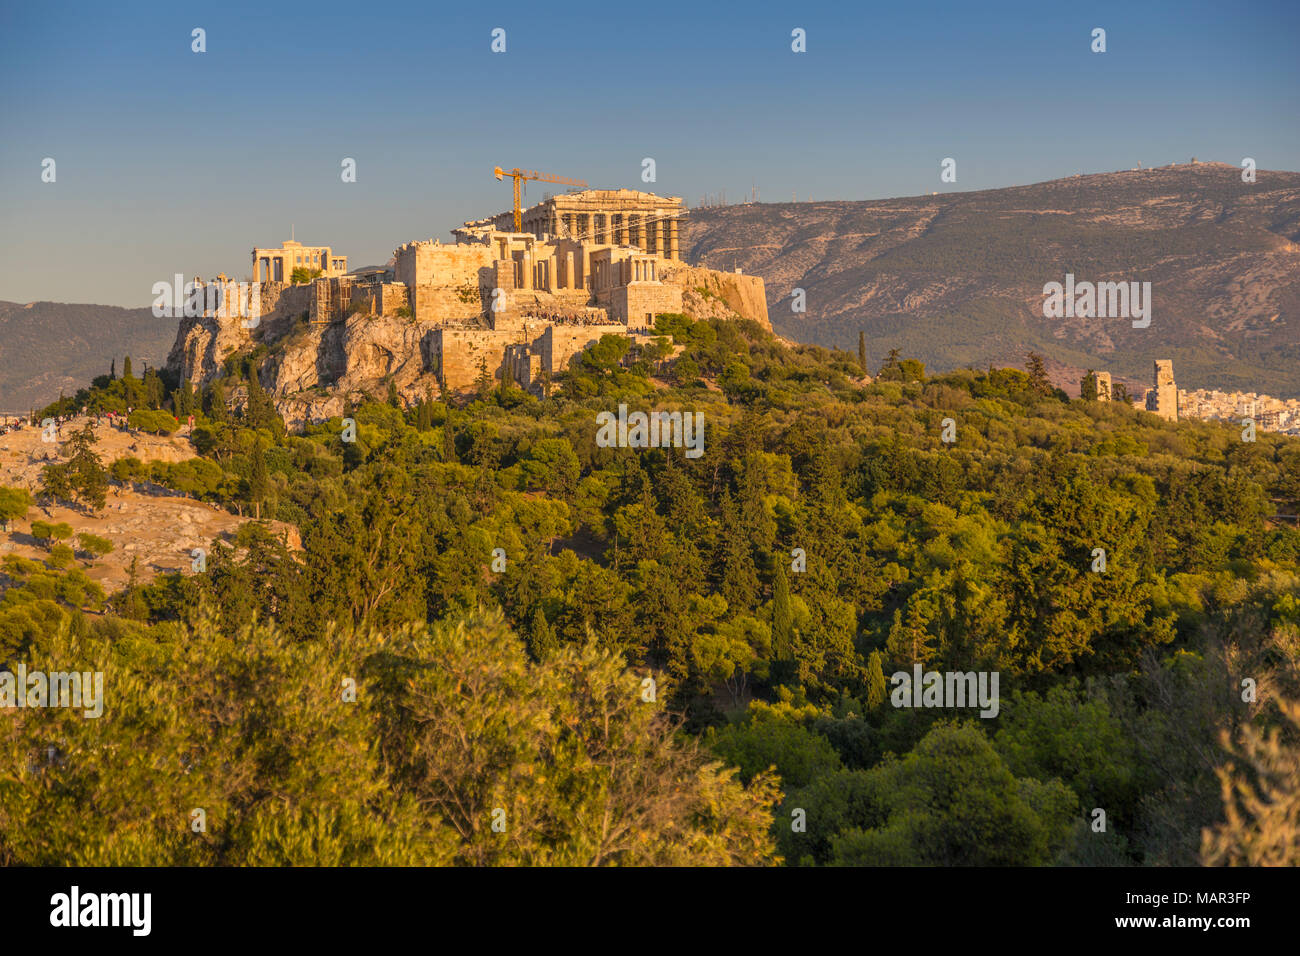 View of The Acropolis, UNESCO World Heritage Site, during late afternoon from Filopappou Hill, Athens, Greece, Europe Stock Photo